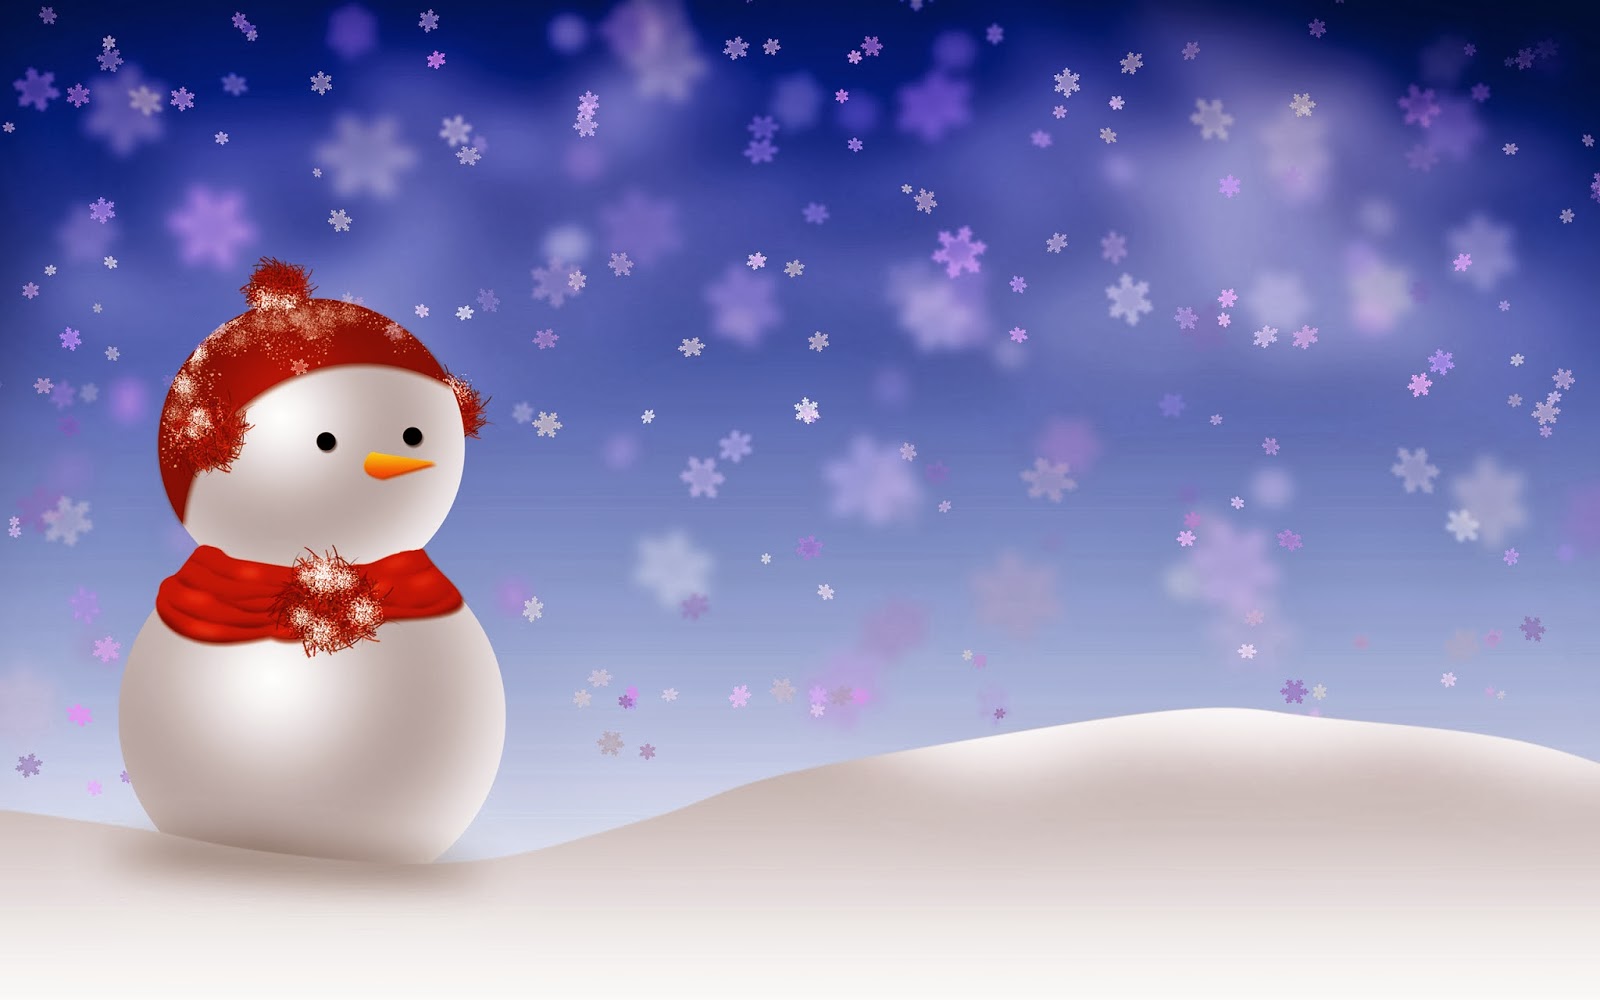 Merry Christmas Snowman Greetings And Widescreen Background